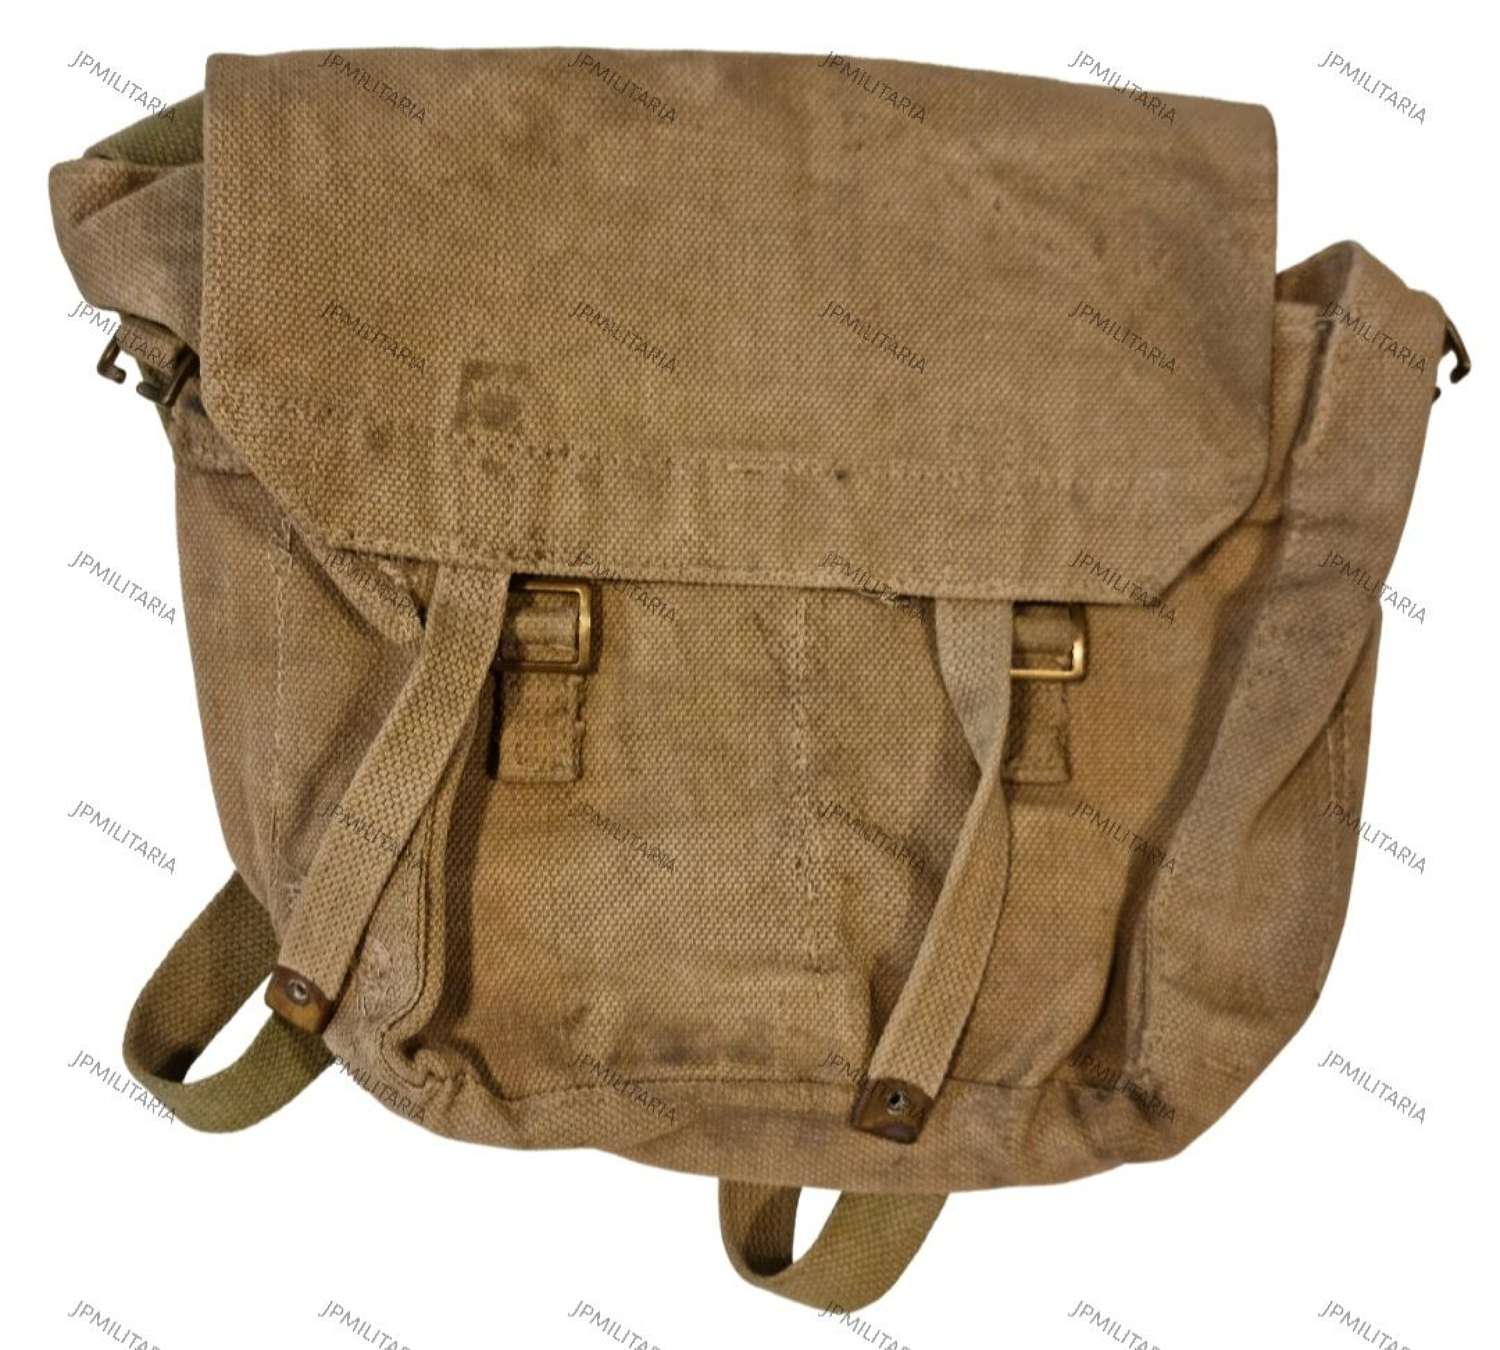 British 1937 pattern small pack with L straps